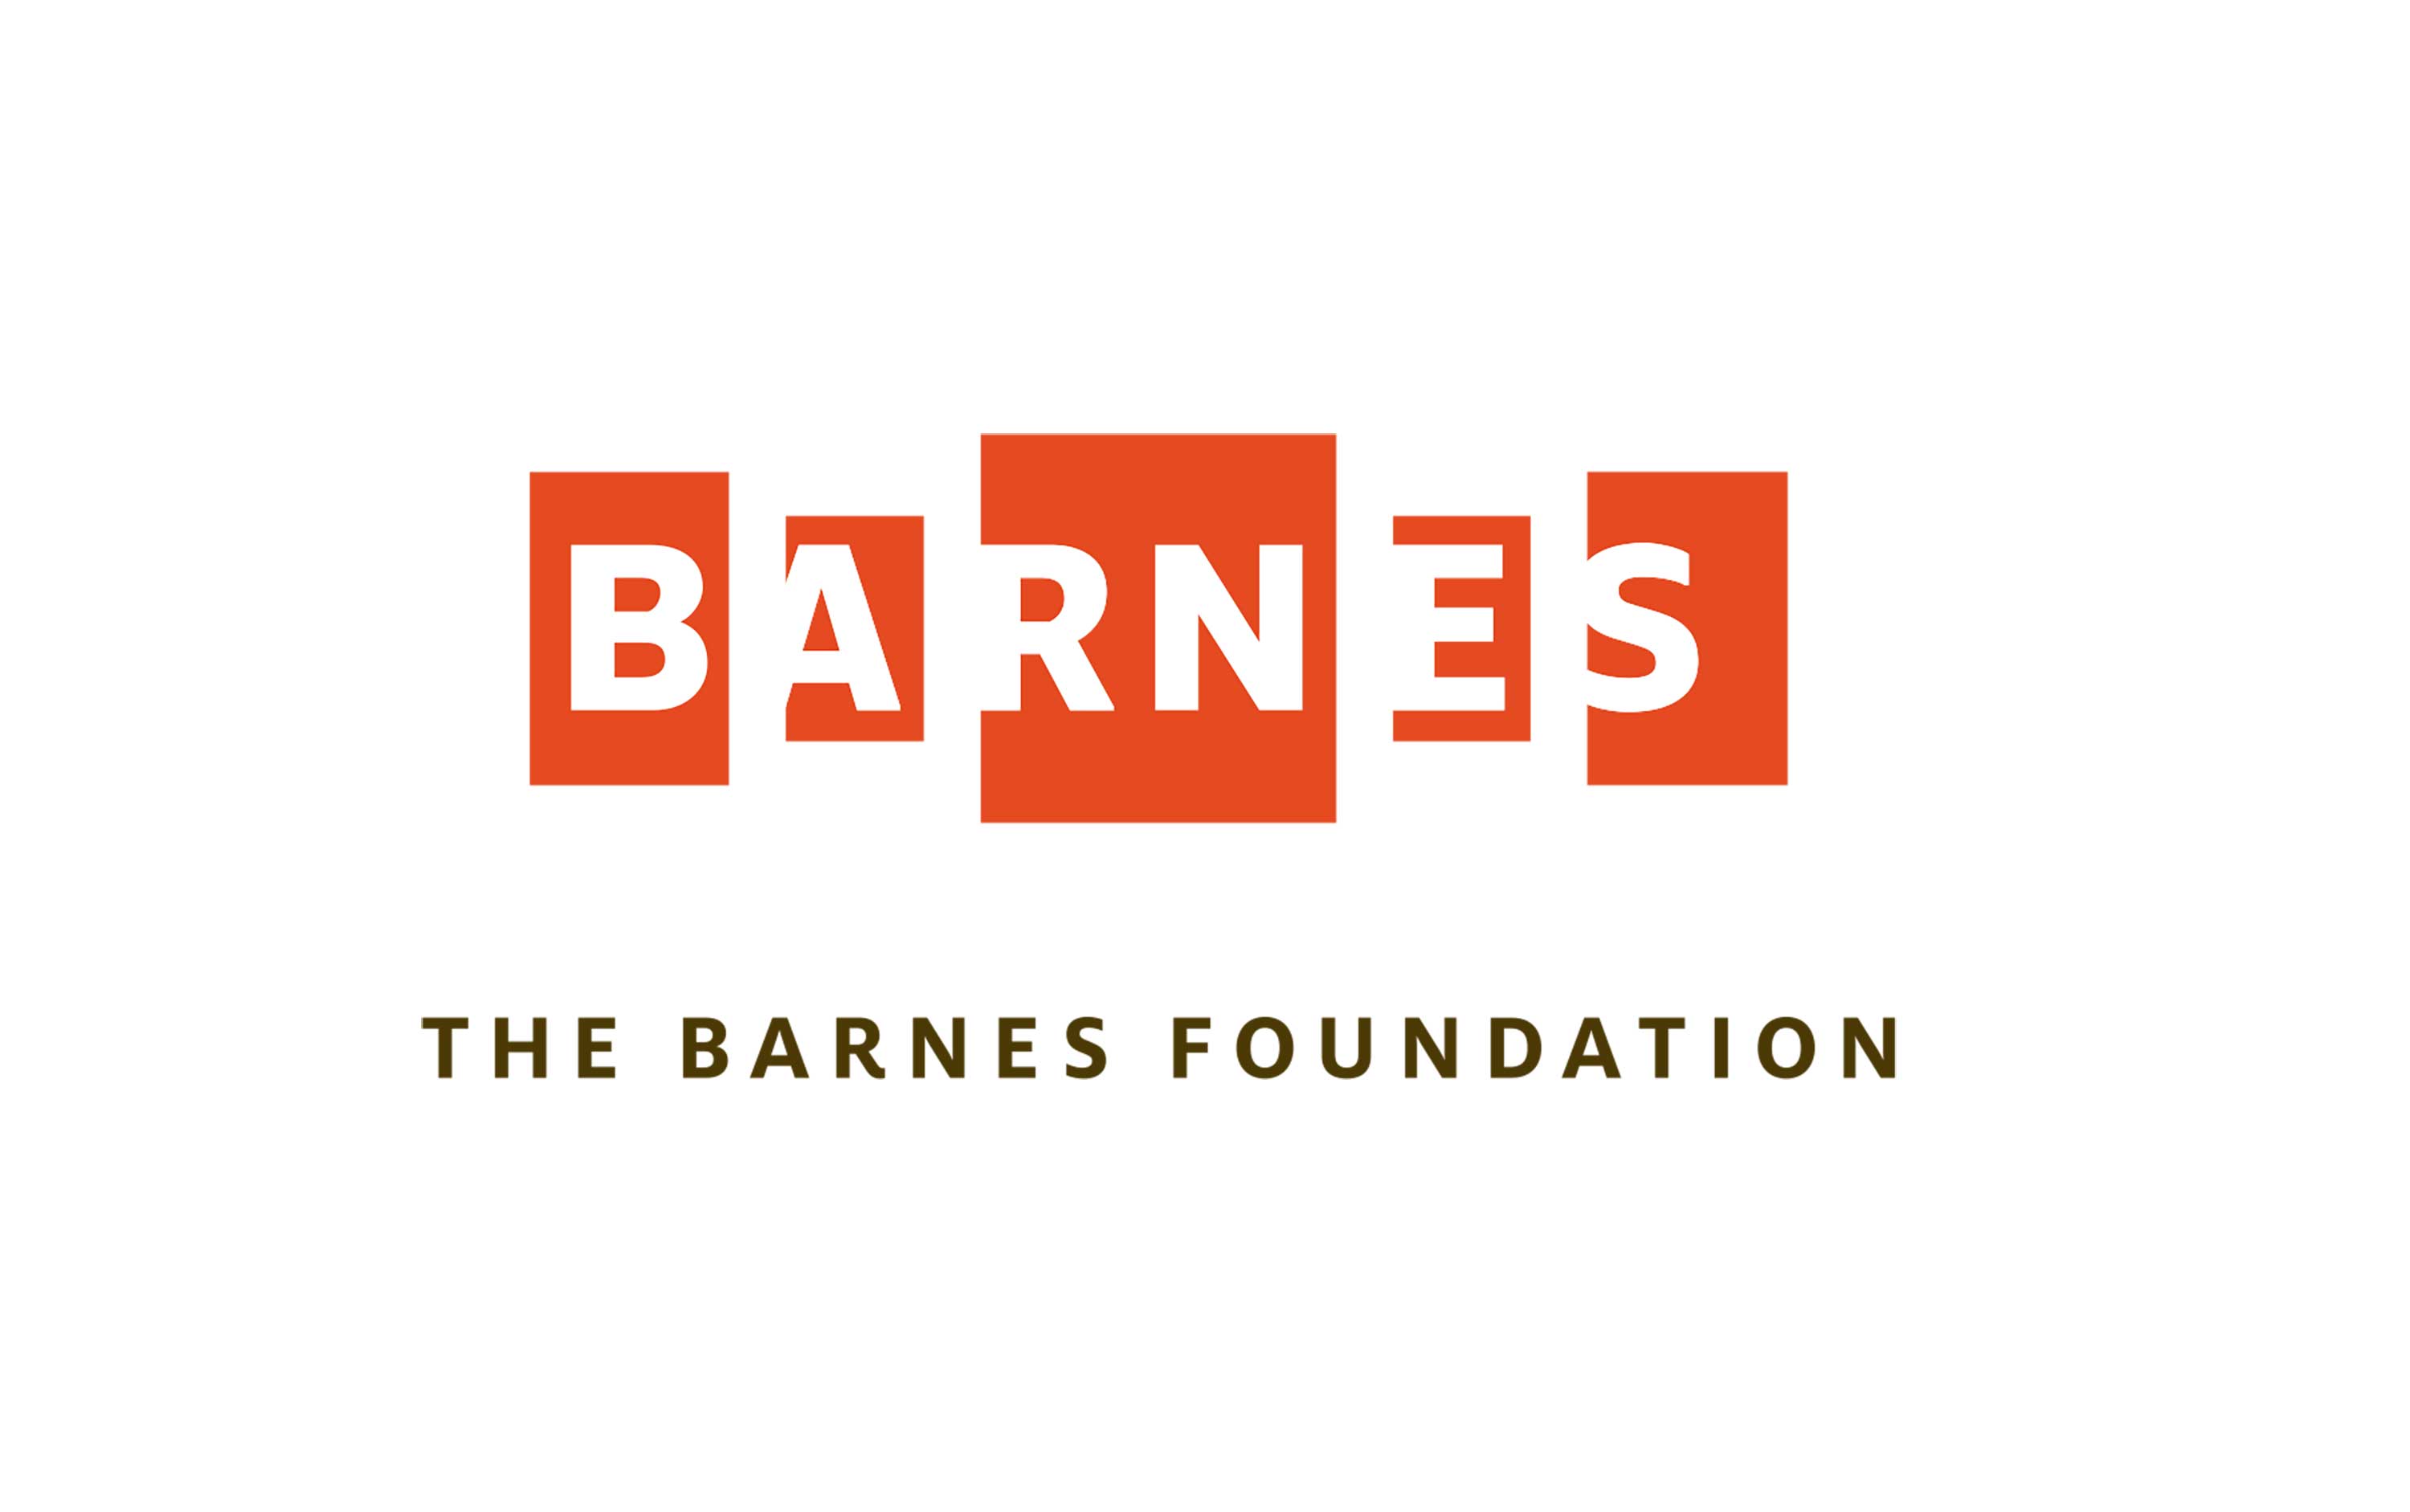 Identity, wayfinding, and website design for The Barnes Foundation.